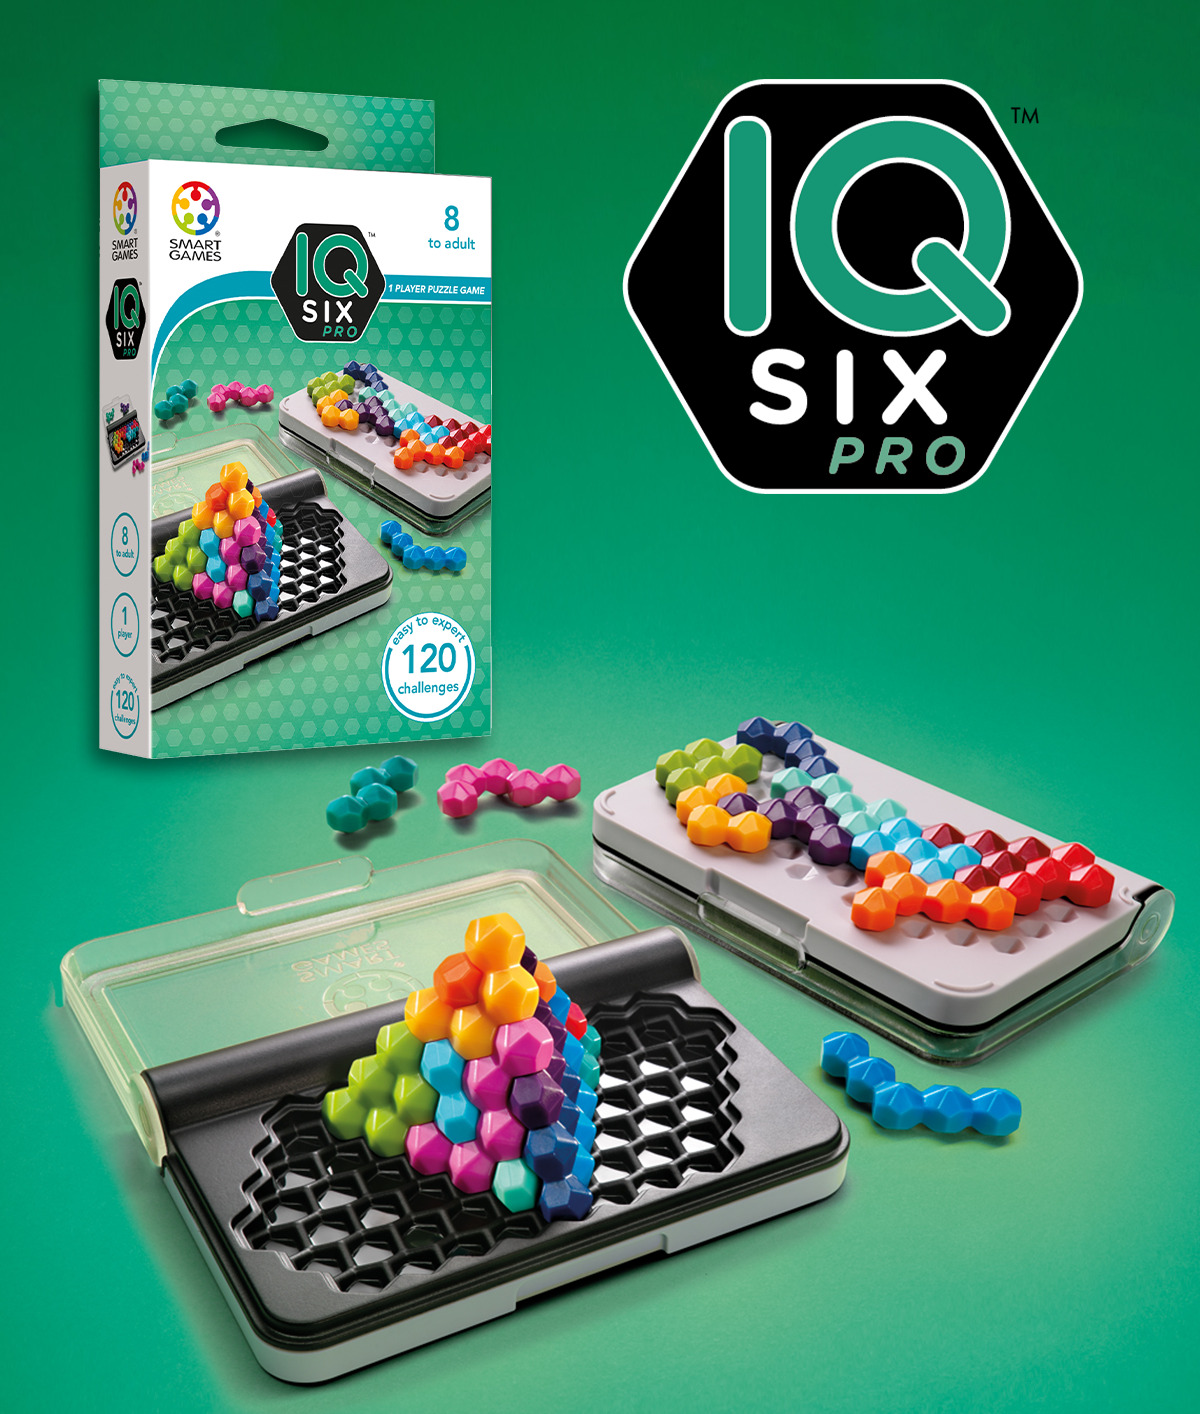 Smart Games IQ Puzzler Pro Board Game Puzzle, 120 Challenges - For Ages 6 +